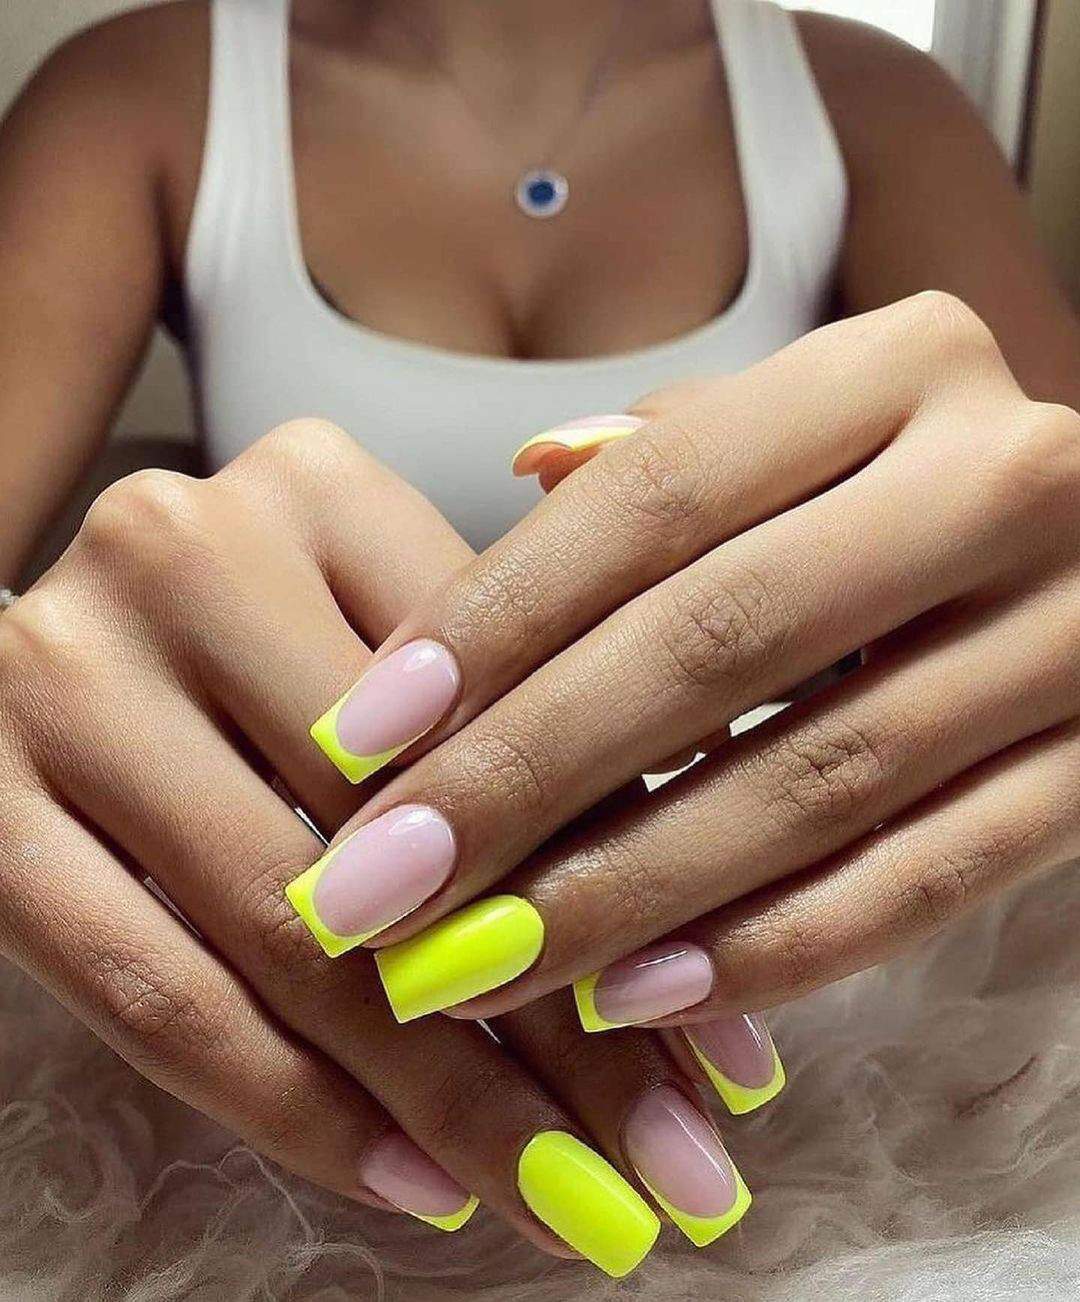 30+ Best Summer 2021 Nail Trends And Manicure Ideas images 28